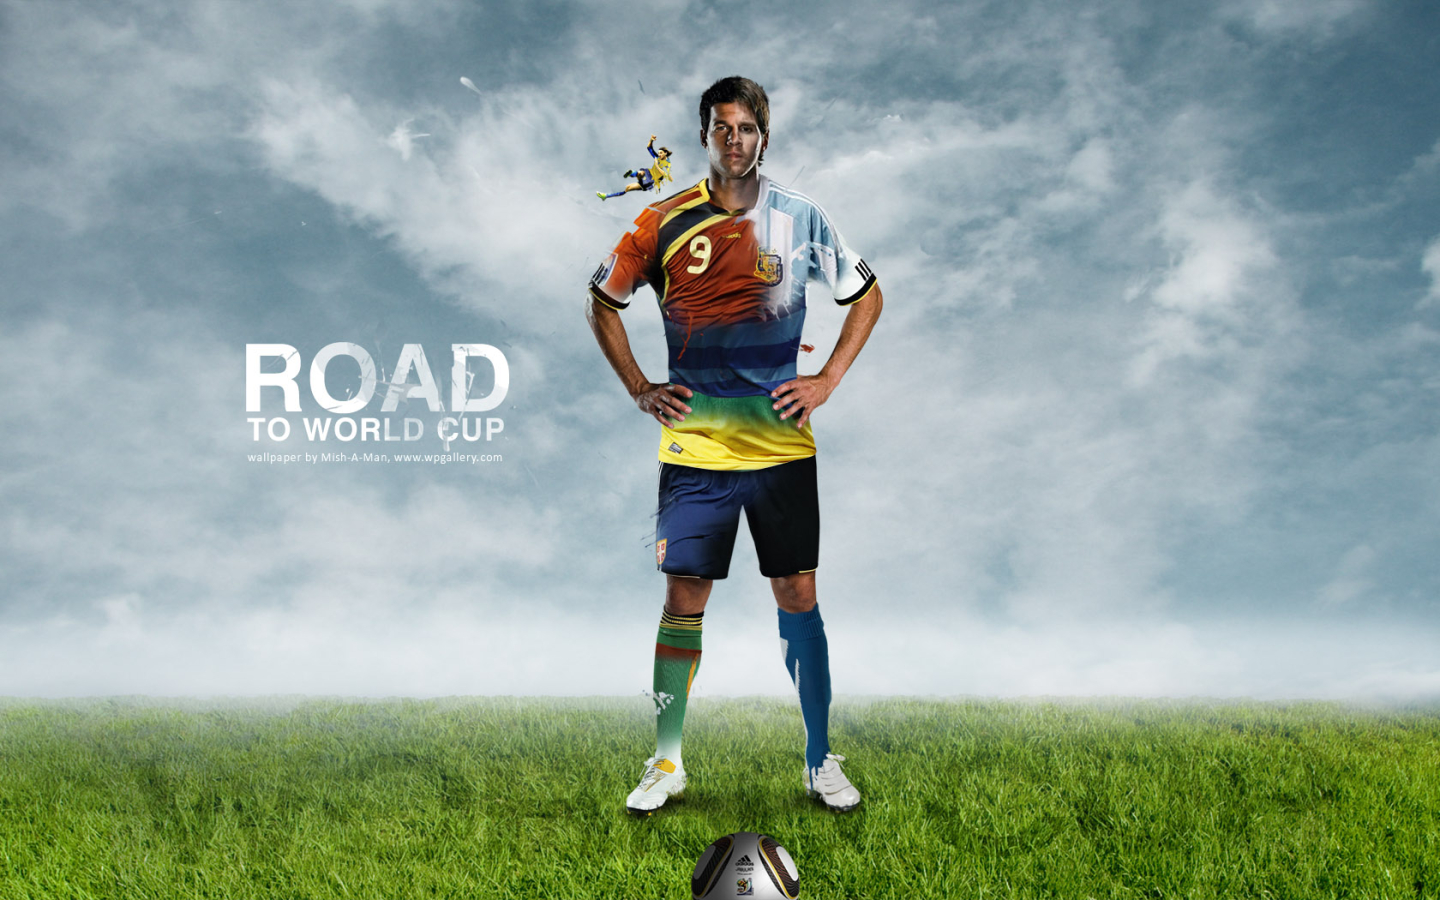 Road to World Cup for 1440 x 900 widescreen resolution